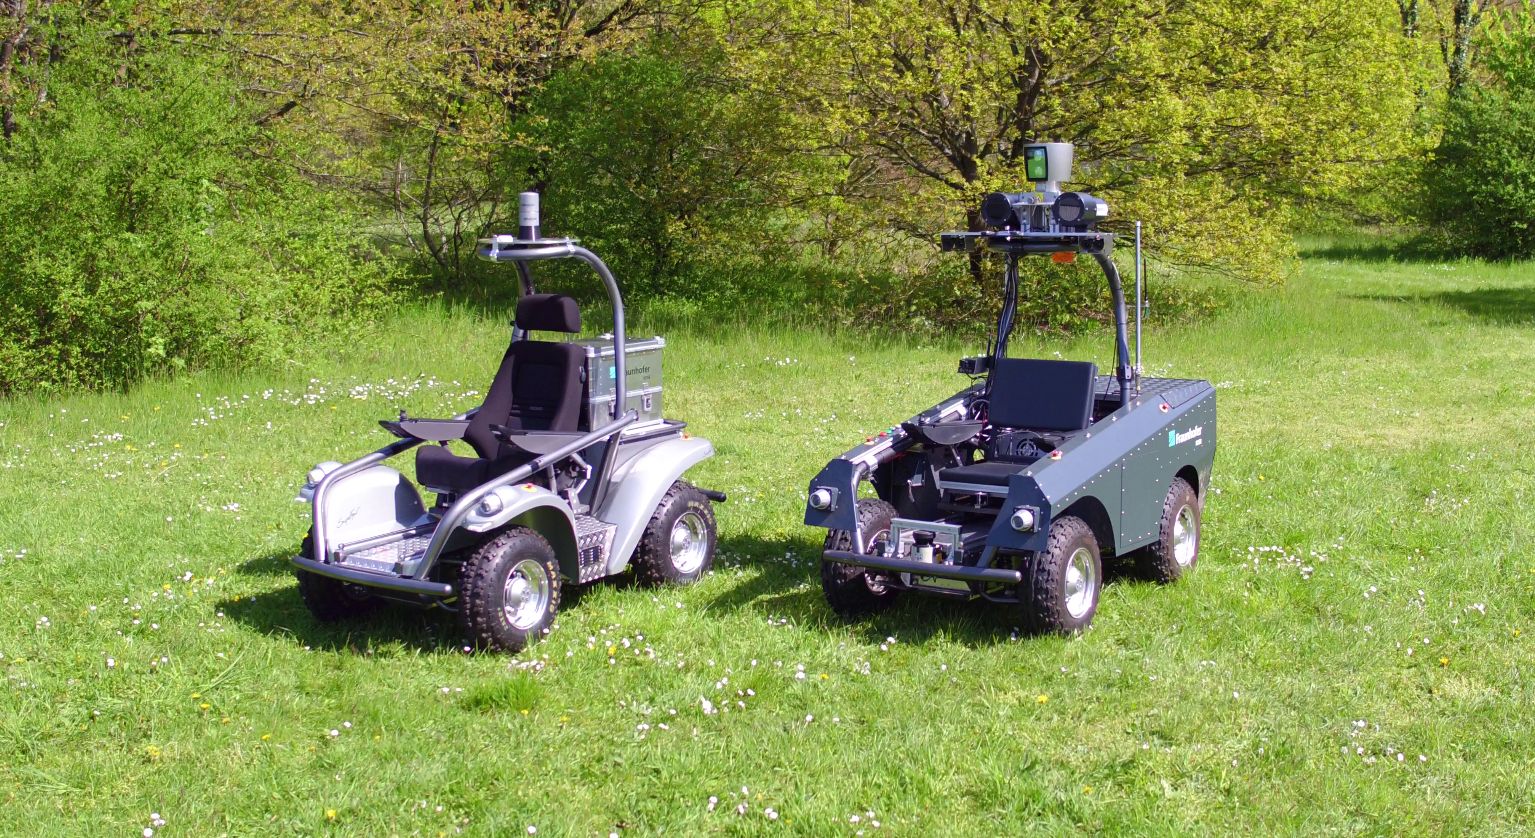 Mobile robots on the lawn